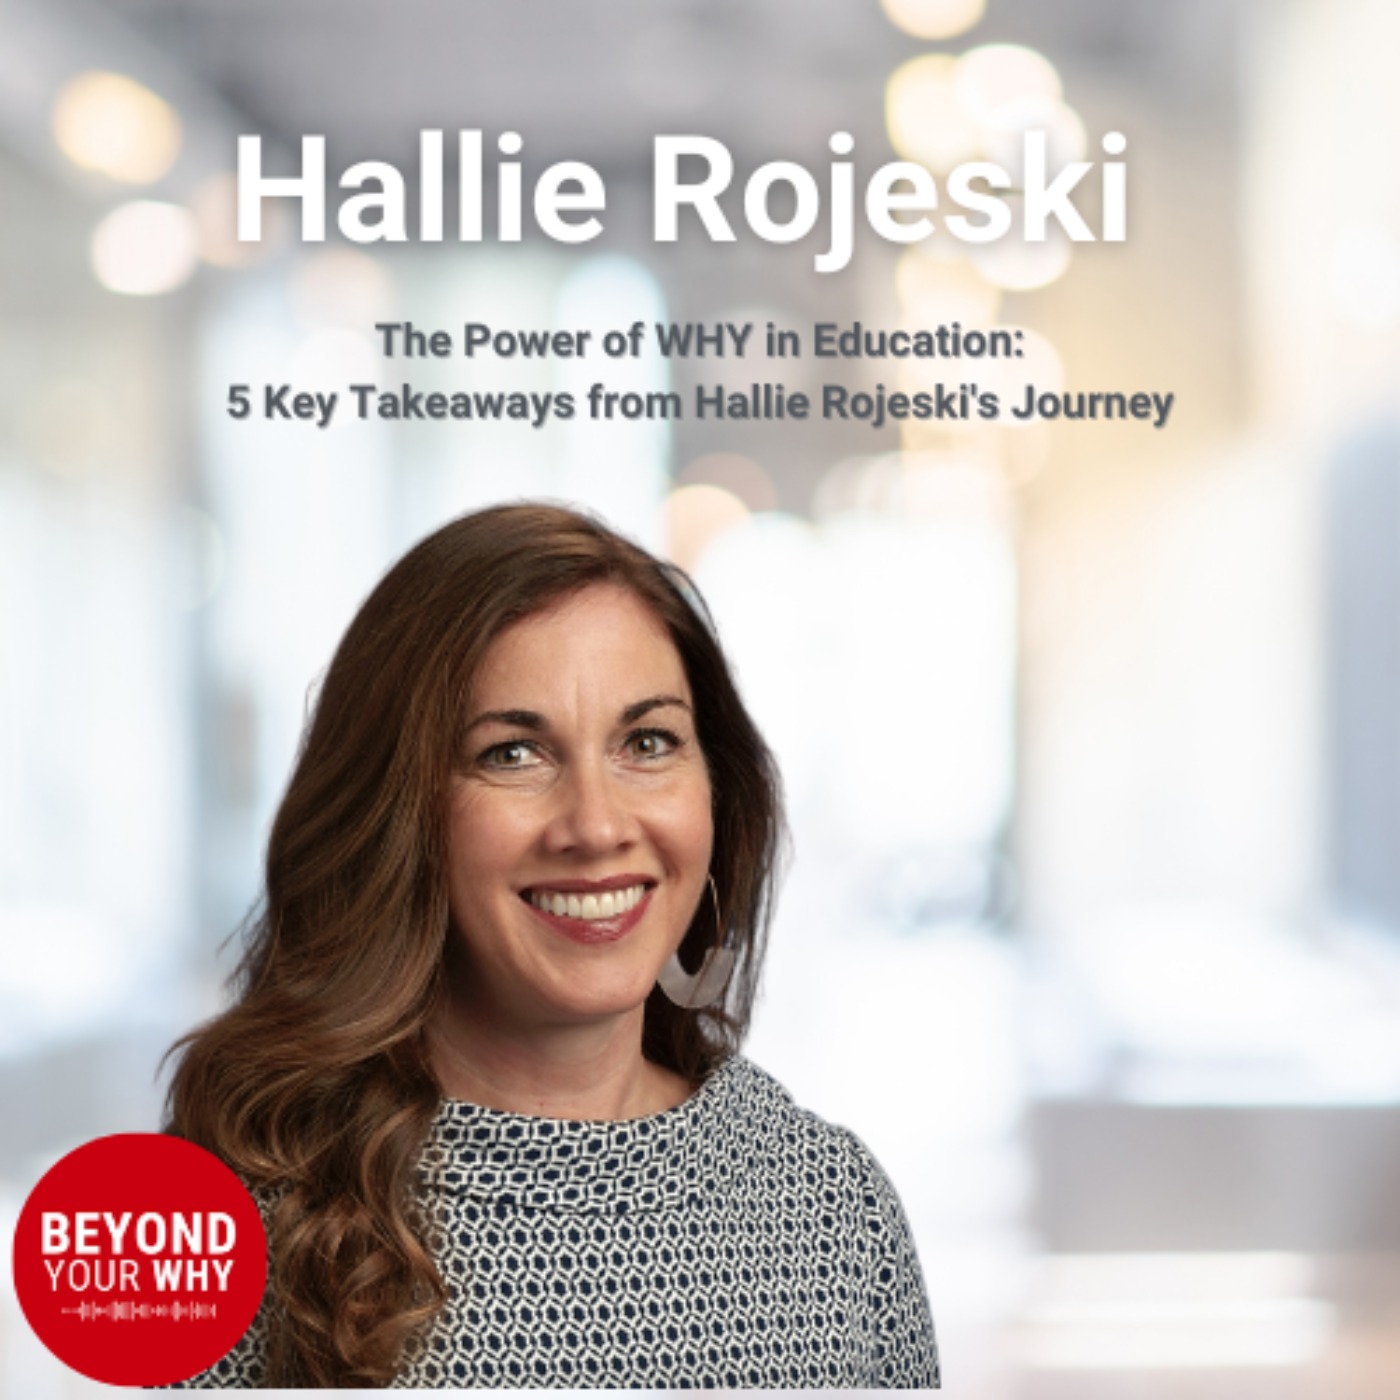 The Power of WHY in Education: 5 Key Takeaways from Hallie Rojeski's Journey